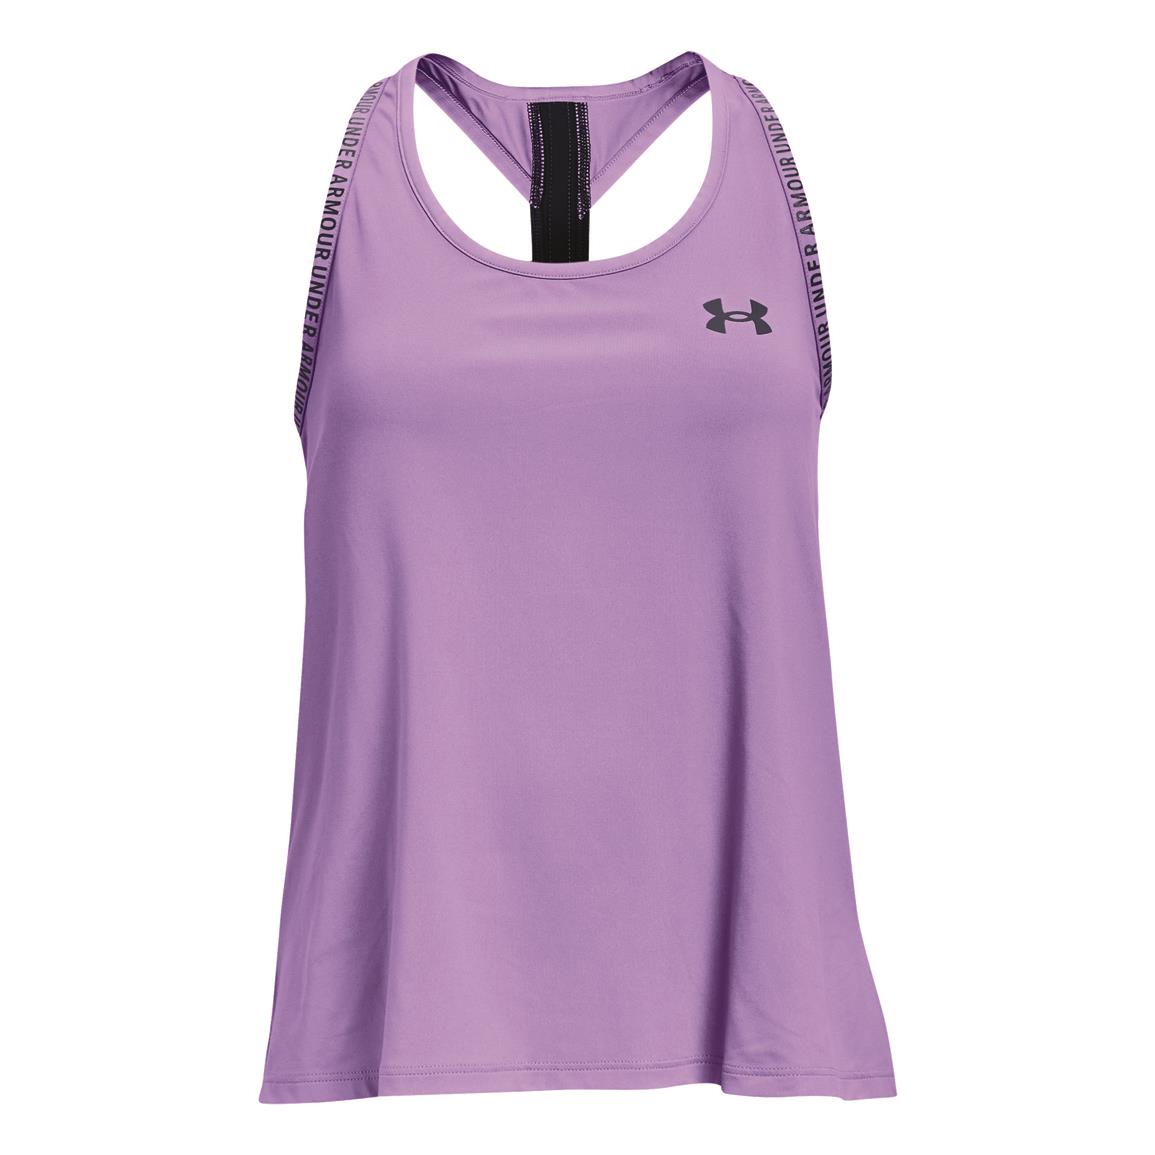 Under Armour Girls' Knockout Tank Top, Vivid Lilac/midnight Navy/utility Blue